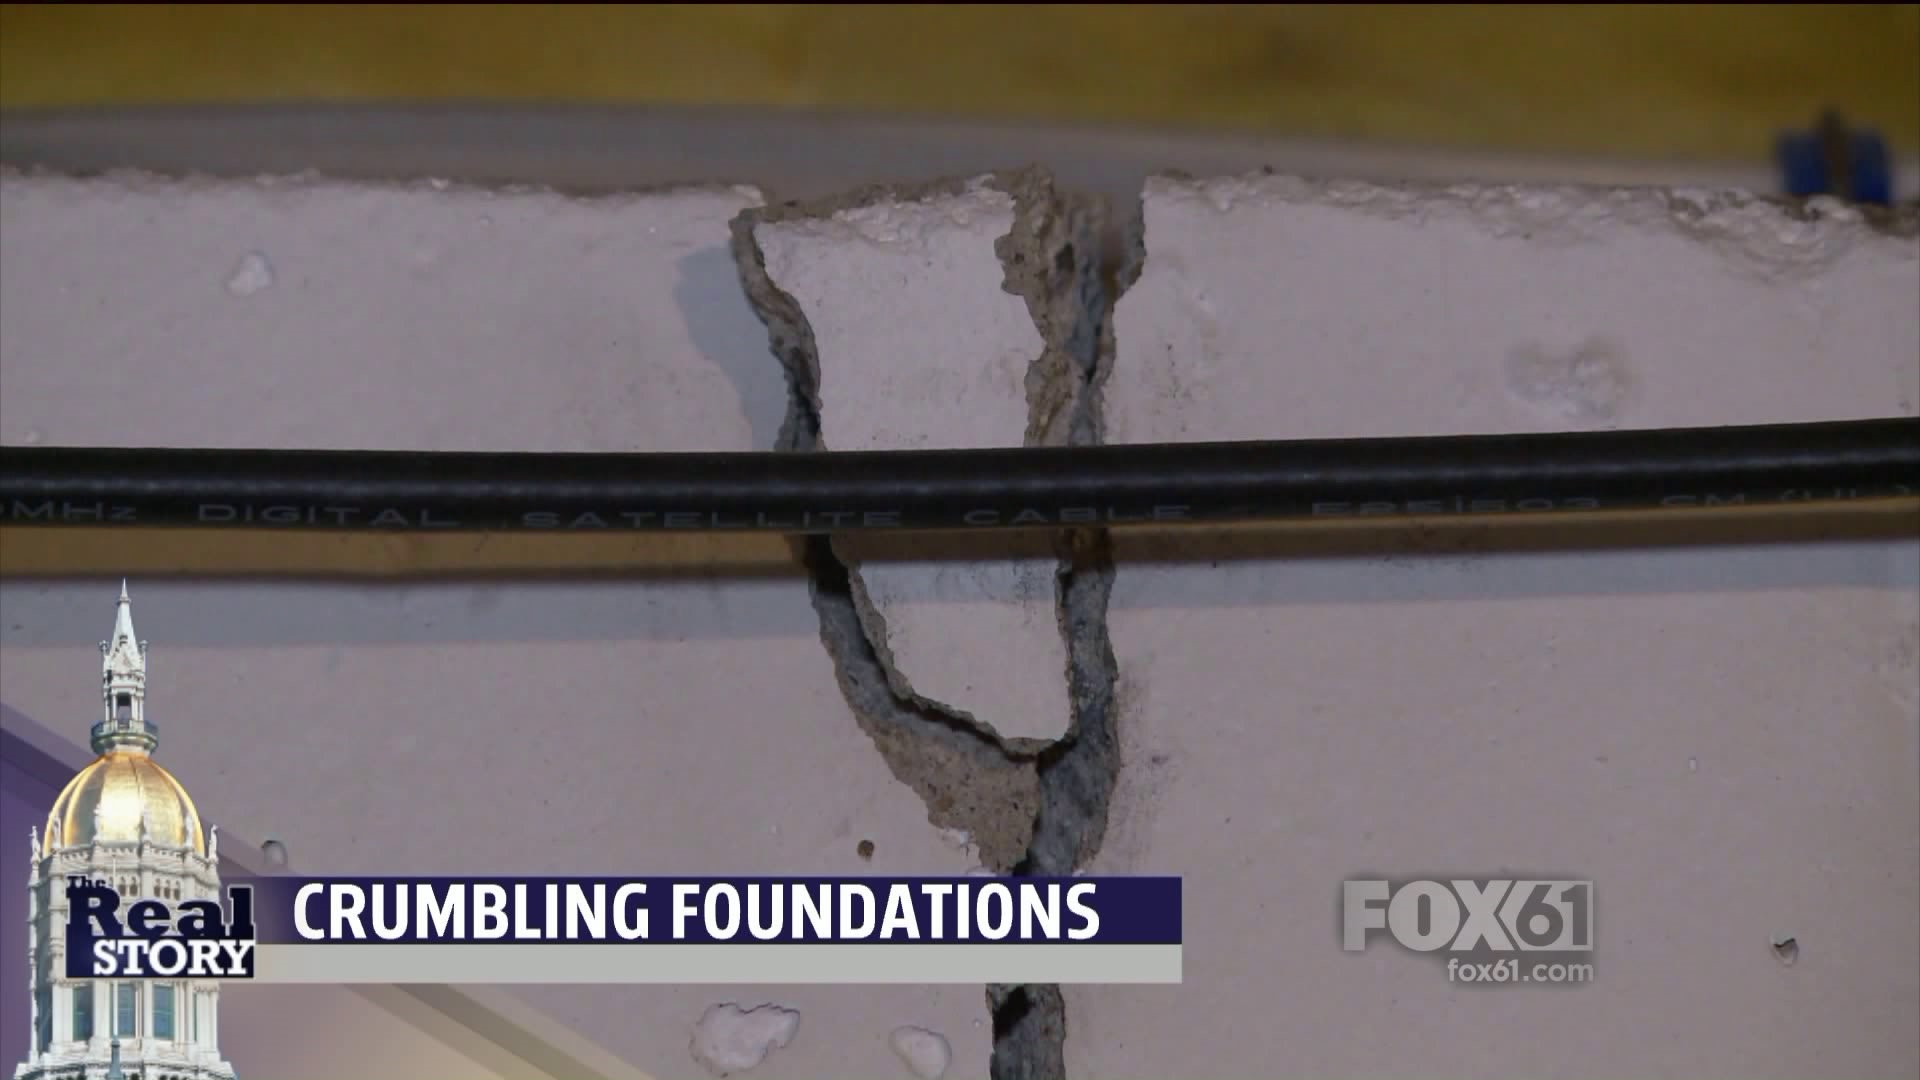 The Real Story: Crumbling foundations